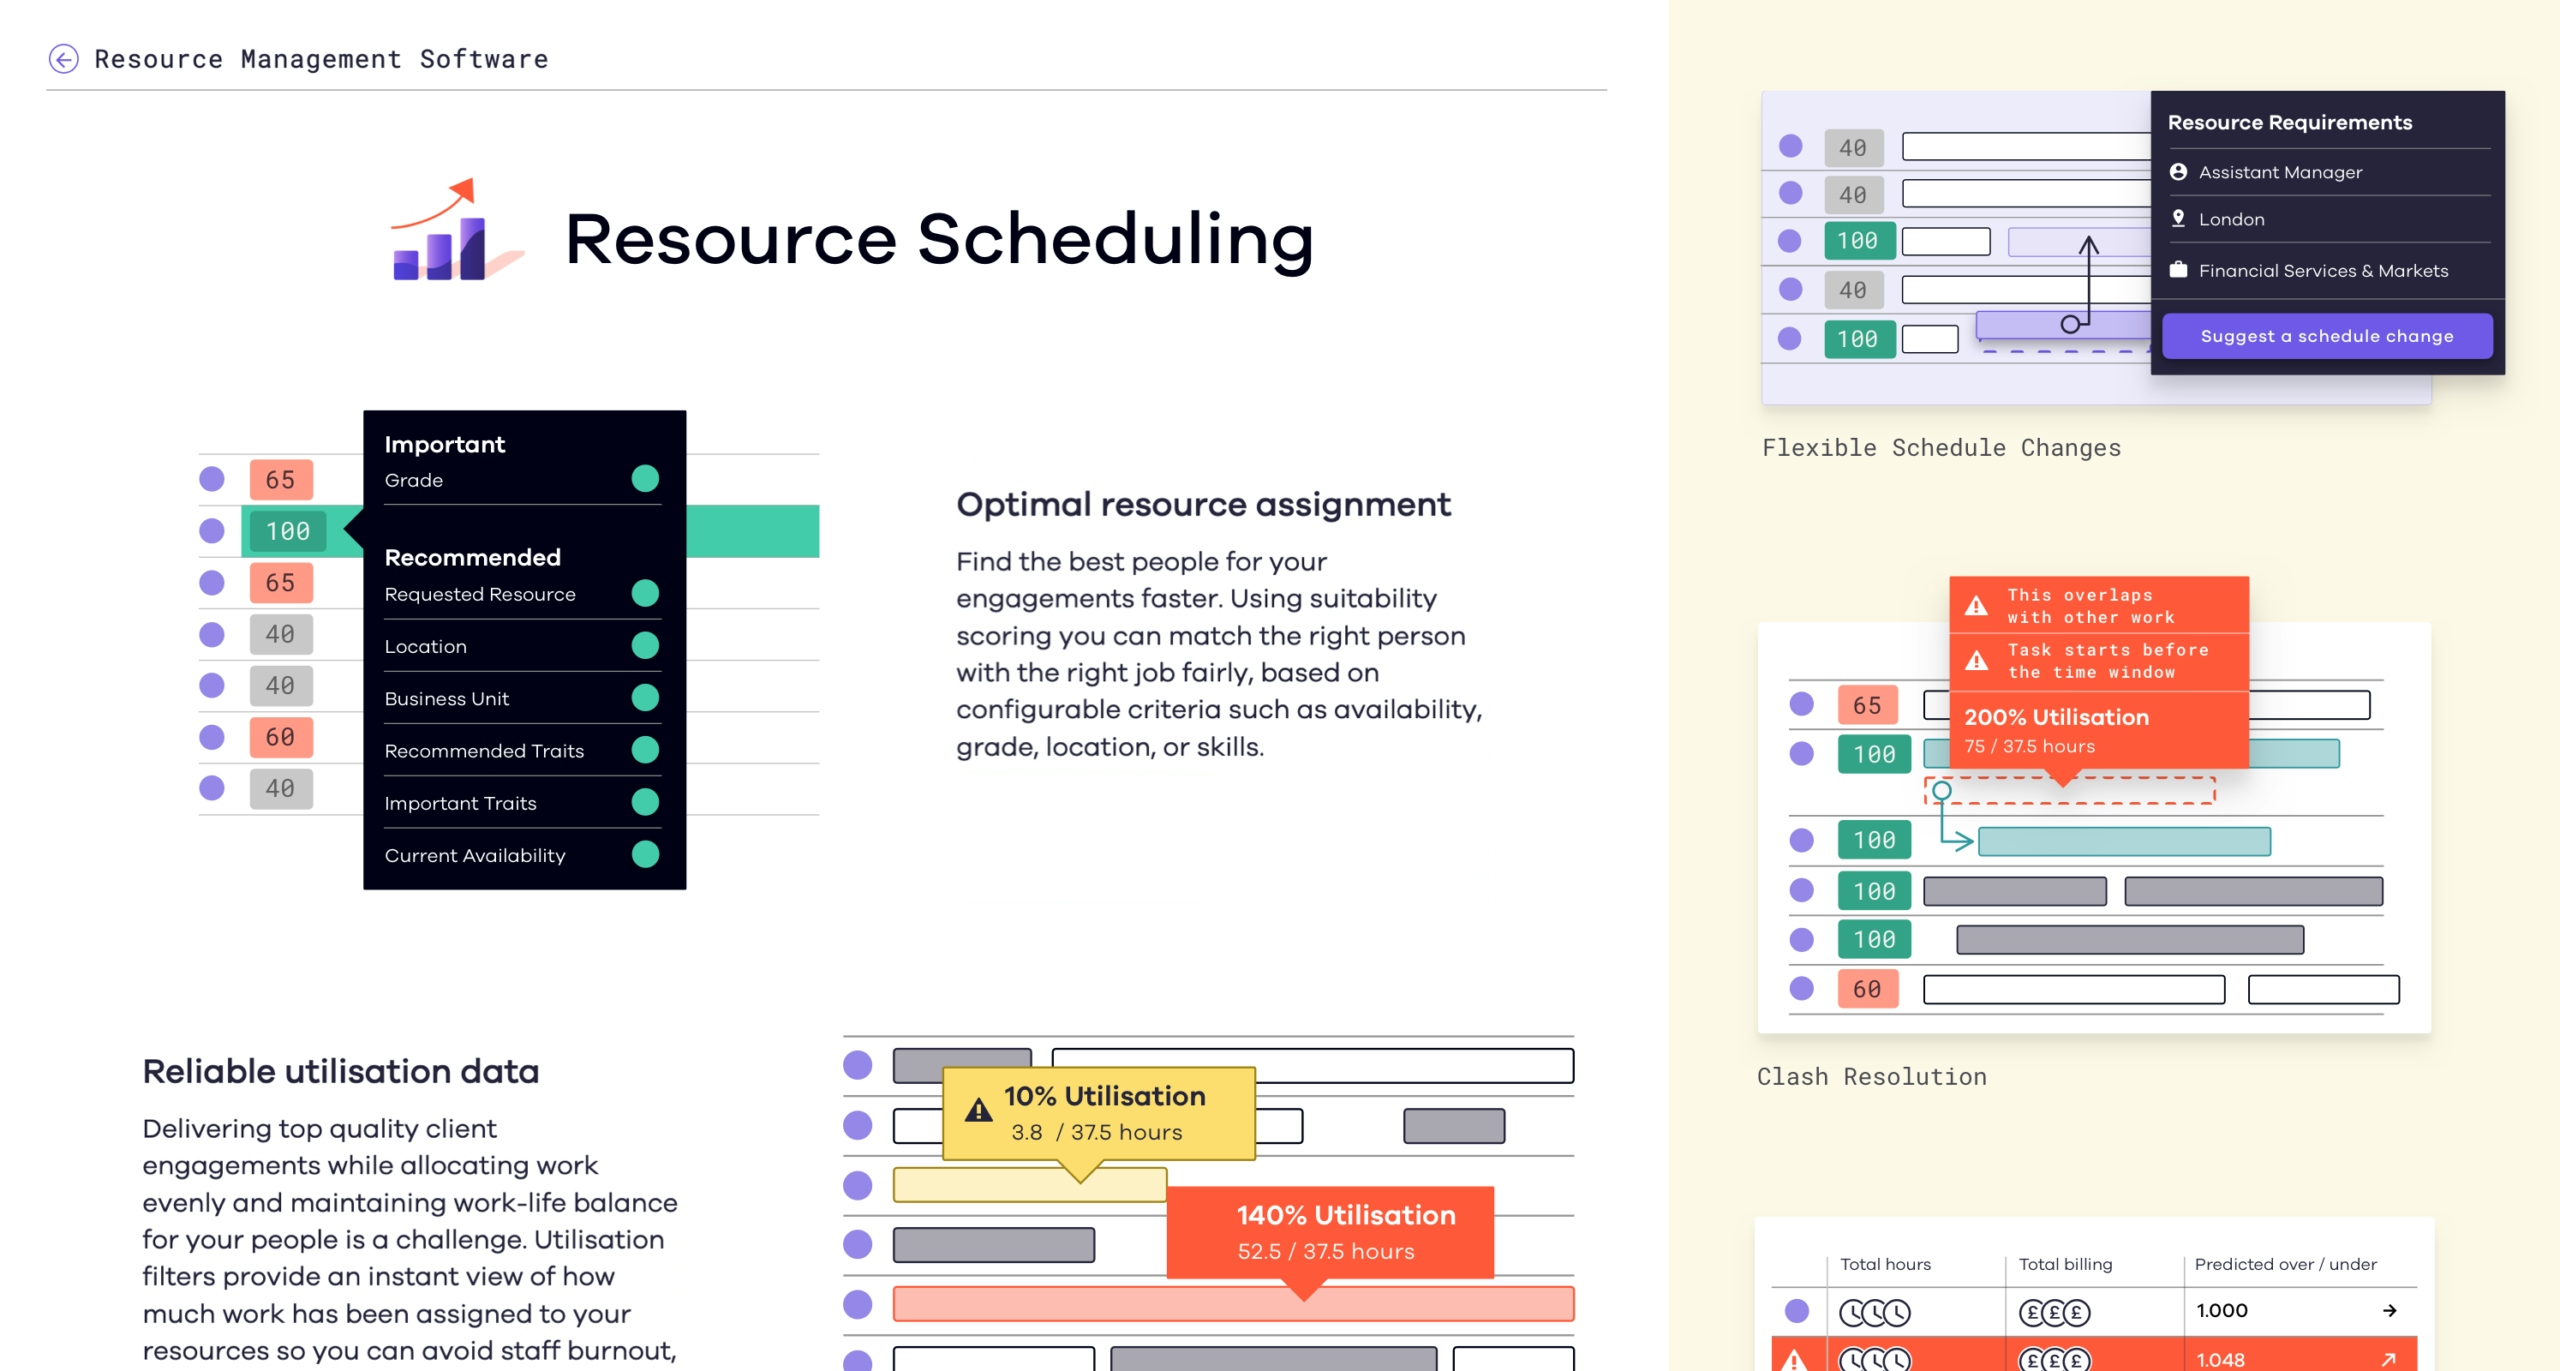 An image of Dayshape’s Resource Scheduling resource on their resource management software. There is illustrative text listing the features and benefits